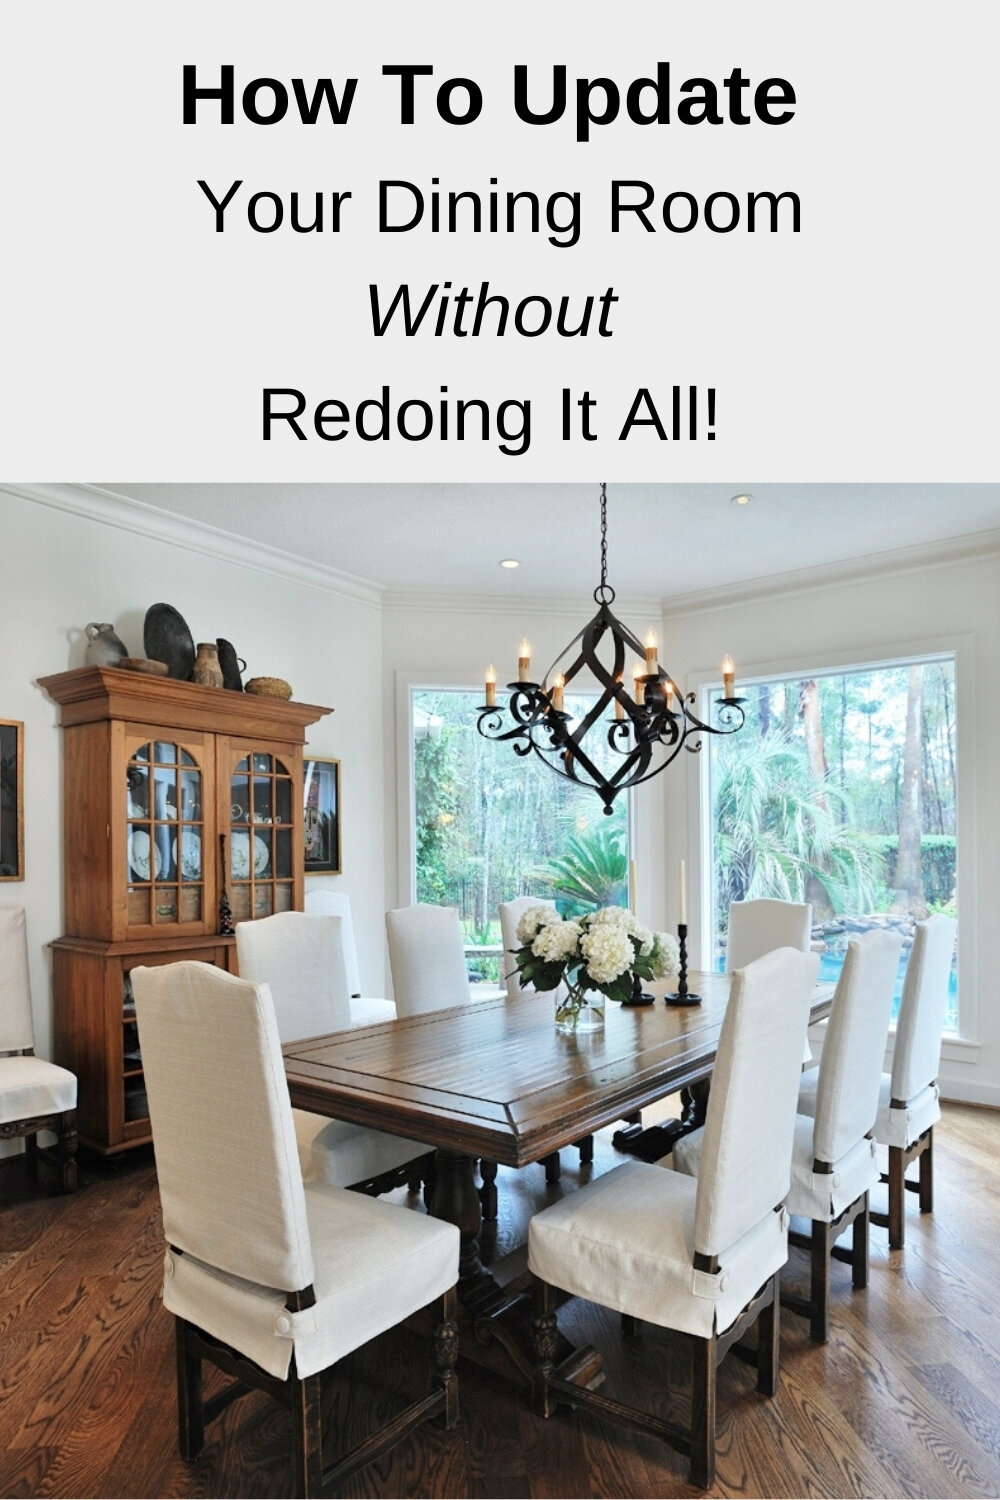 How To Update Your Dining Room Decor, Updating Dining Room Set